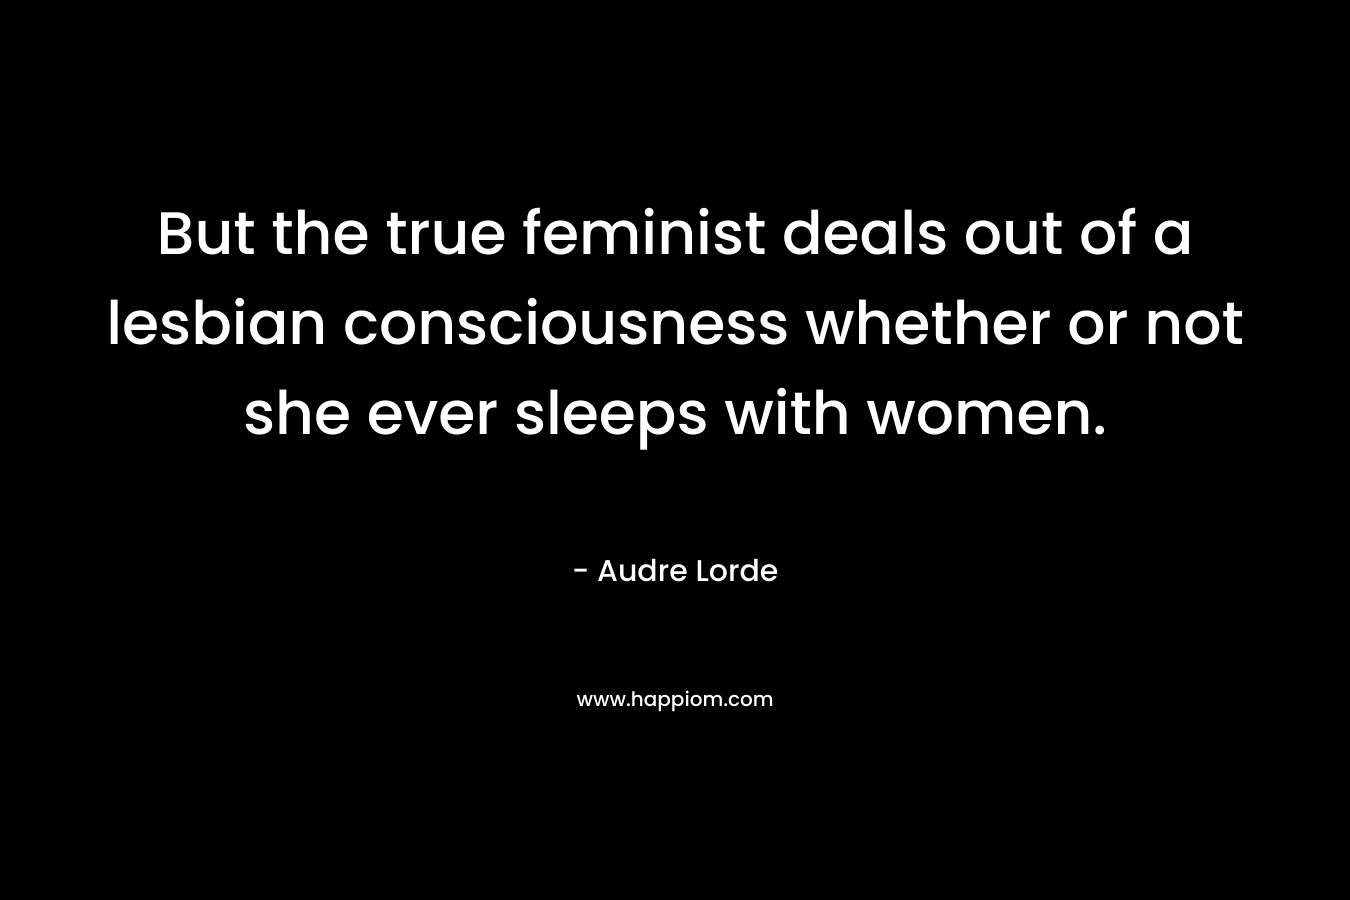 But the true feminist deals out of a lesbian consciousness whether or not she ever sleeps with women.